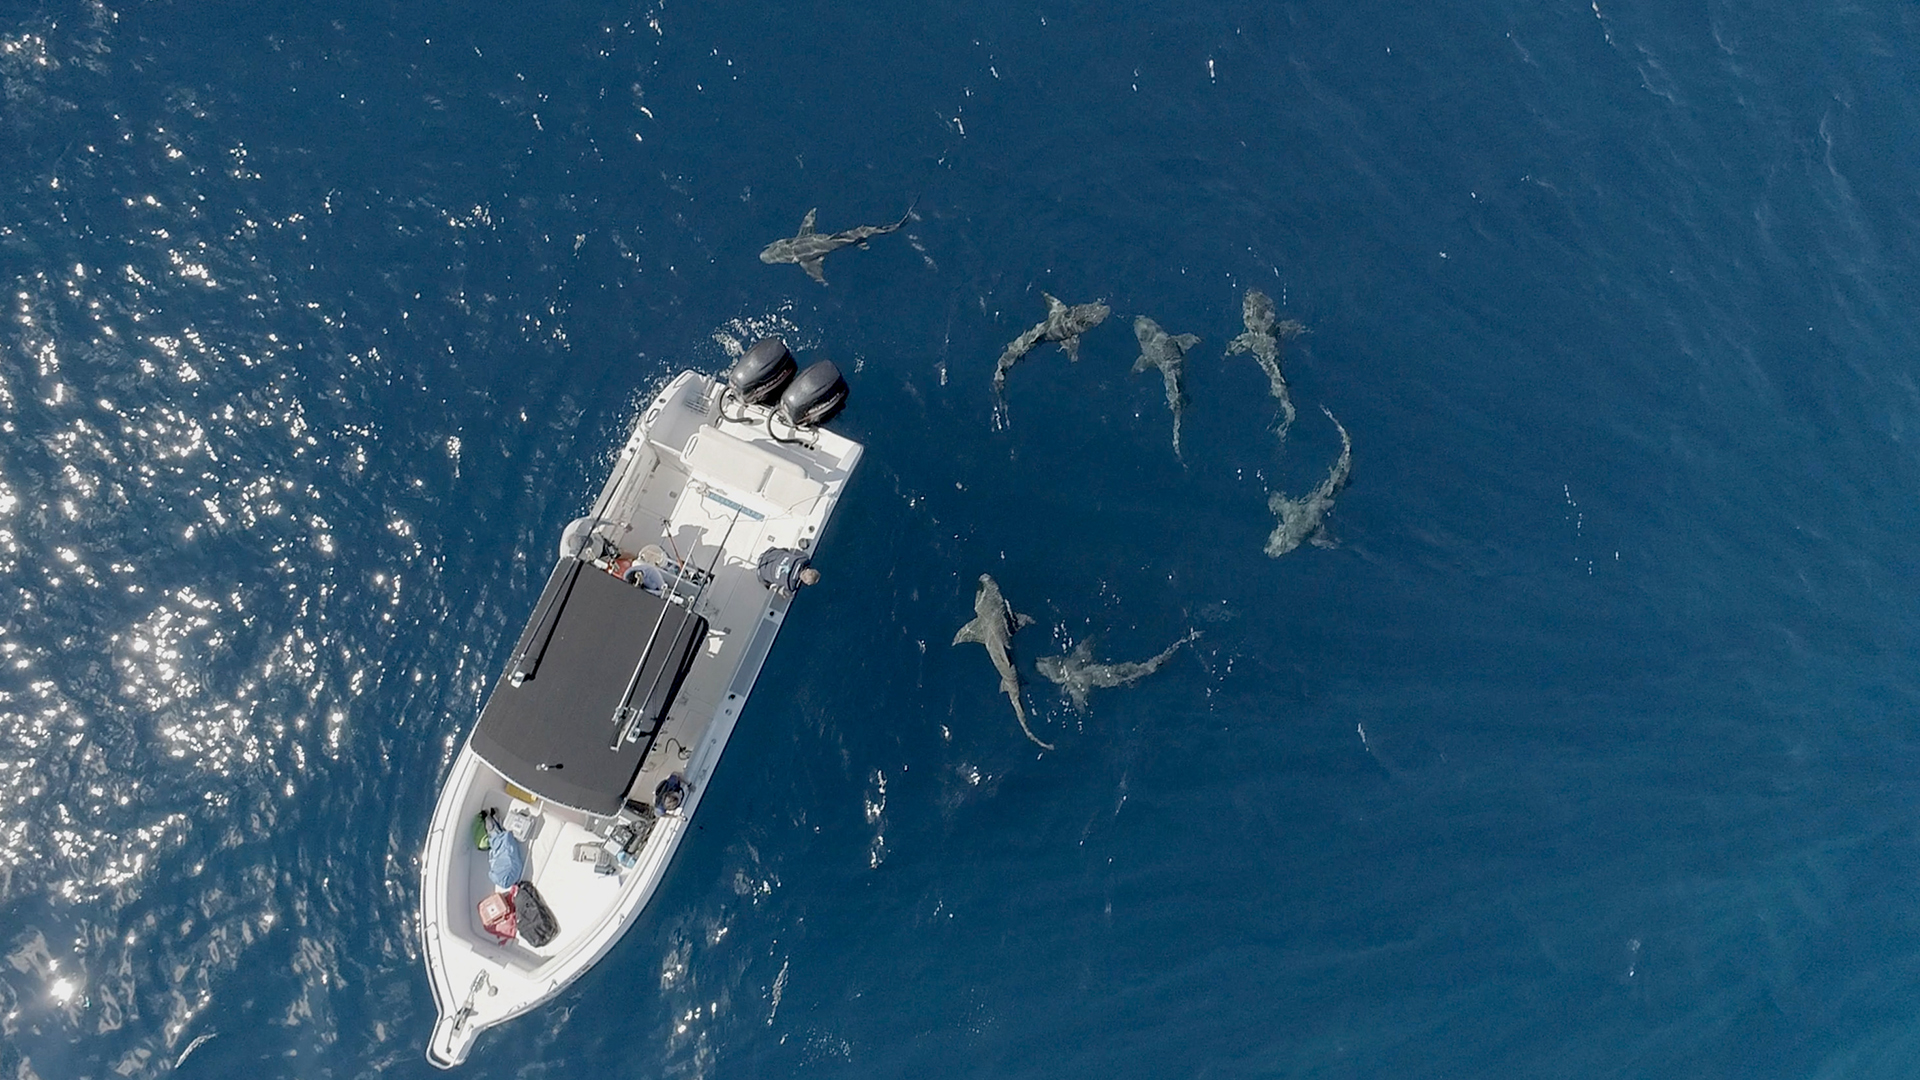 Multiple lemon sharks swim next to a boat. This is from Jaws Vs. Boat. [Photo of the day - July 2022]